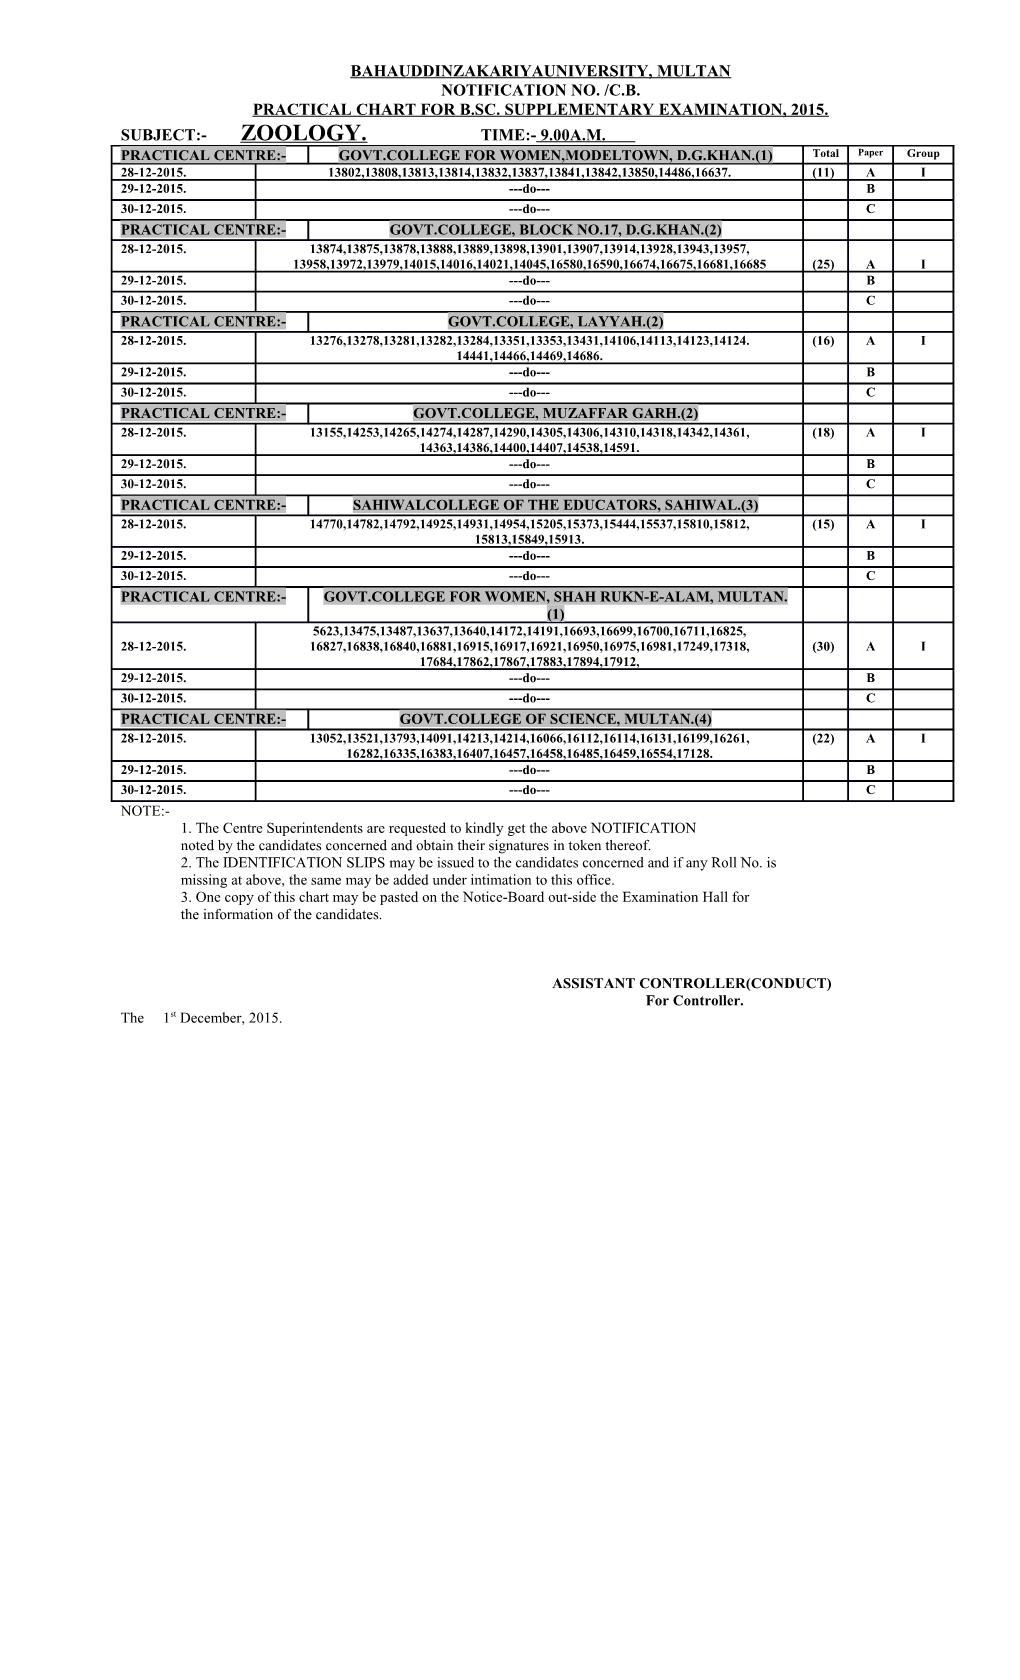 Practical Chart for B.Sc. Supplementary Examination, 2015